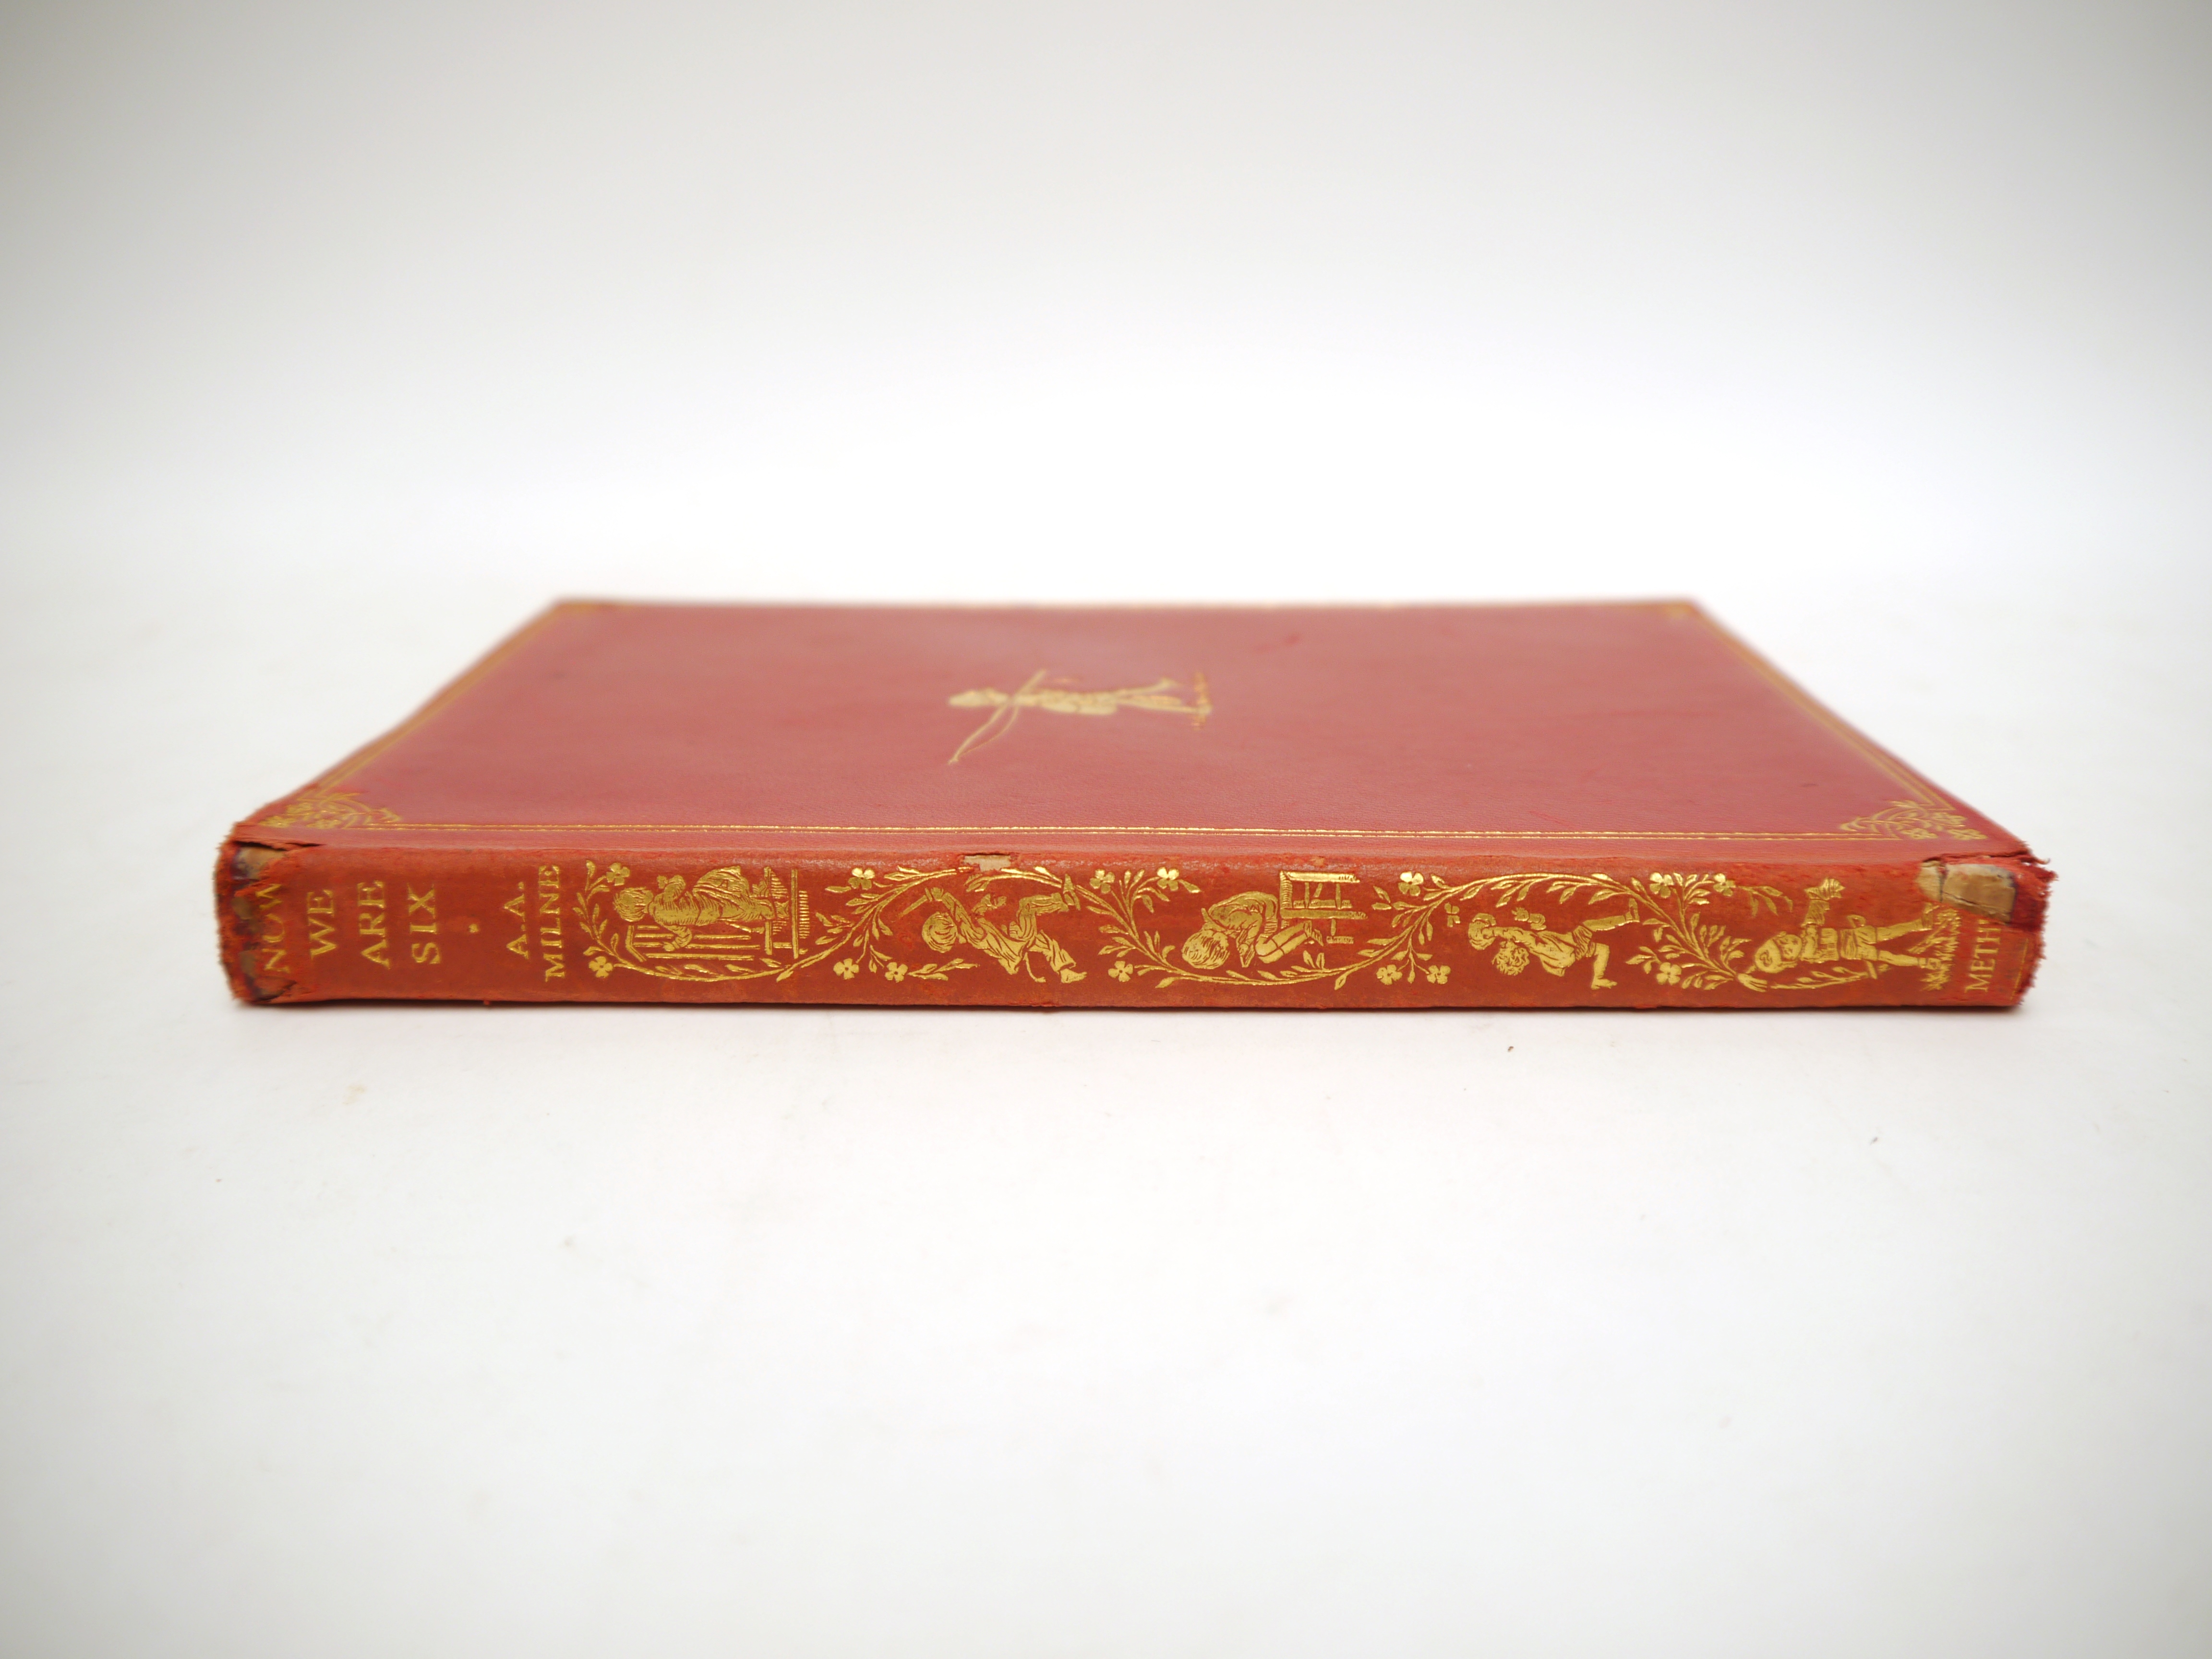 A.A. Milne: 'Now We Are Six', London, Methuen, 1927, 1st edition, publisher's deluxe issue, bound in - Image 6 of 7